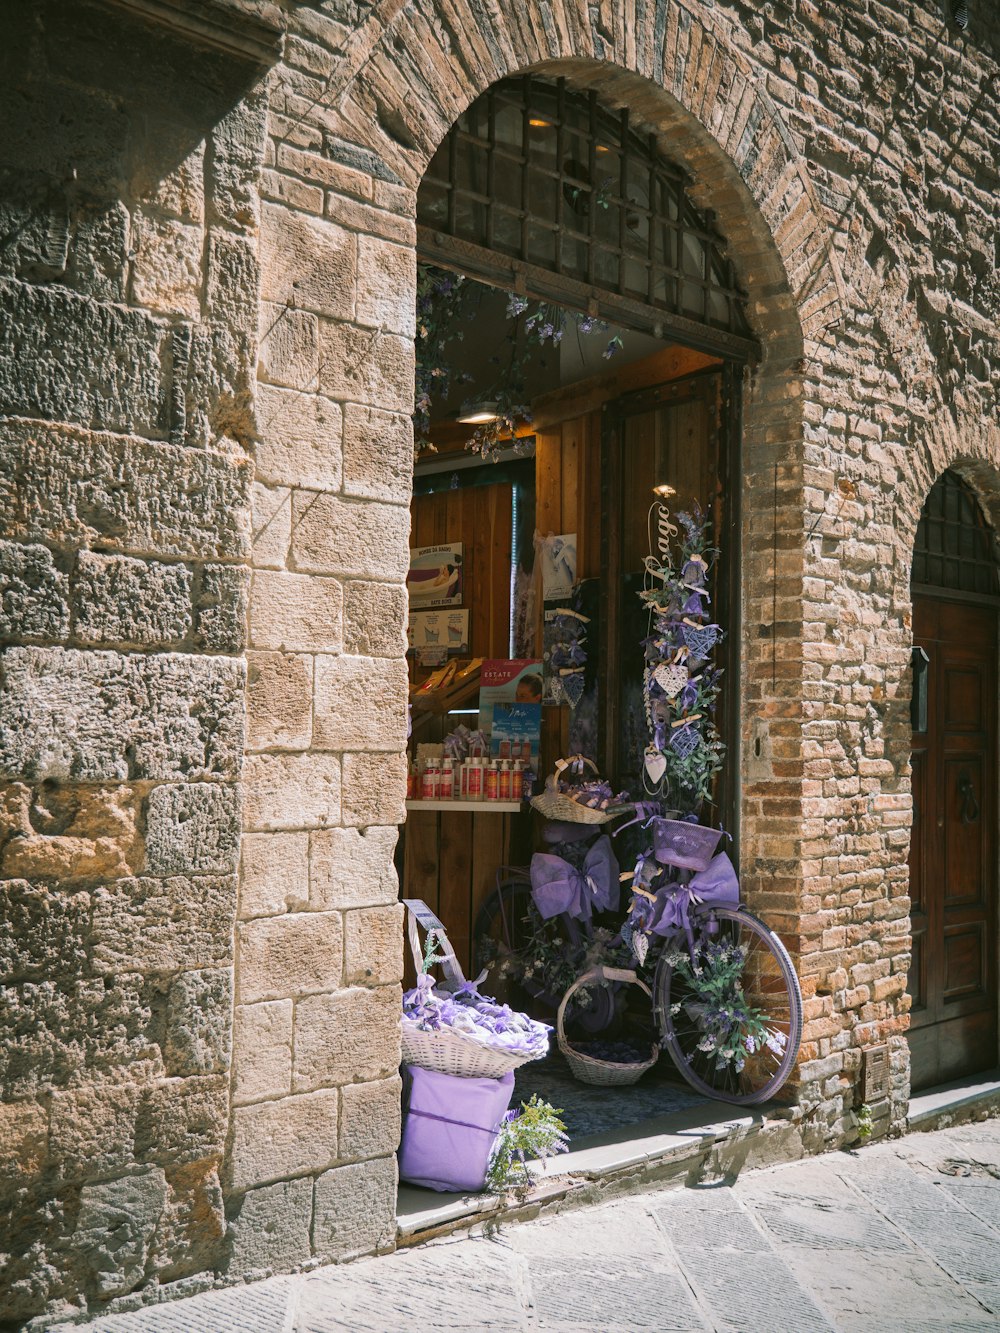 a stone building with a stone archway and a bike rack with flowers